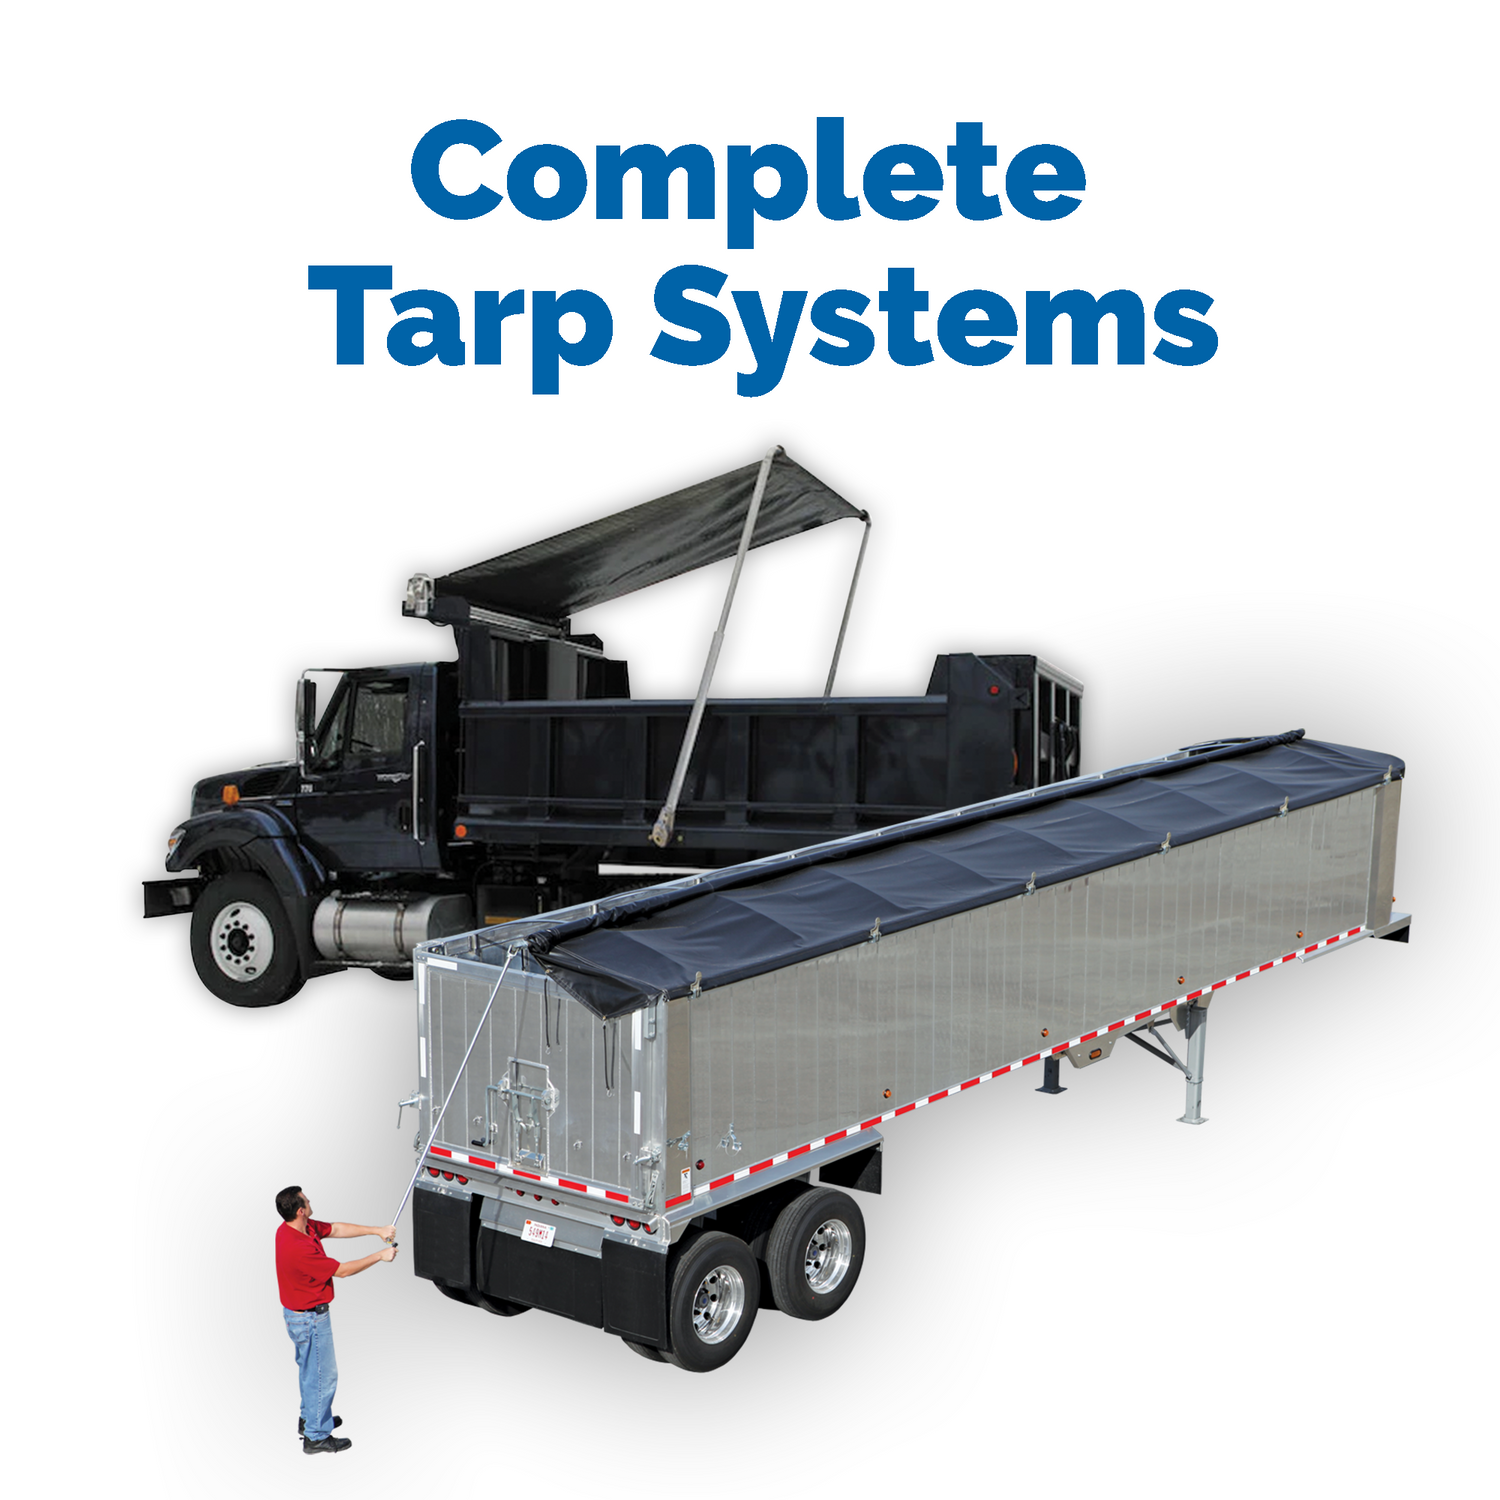 Complete Side & Underbody Dump Tarp Systems